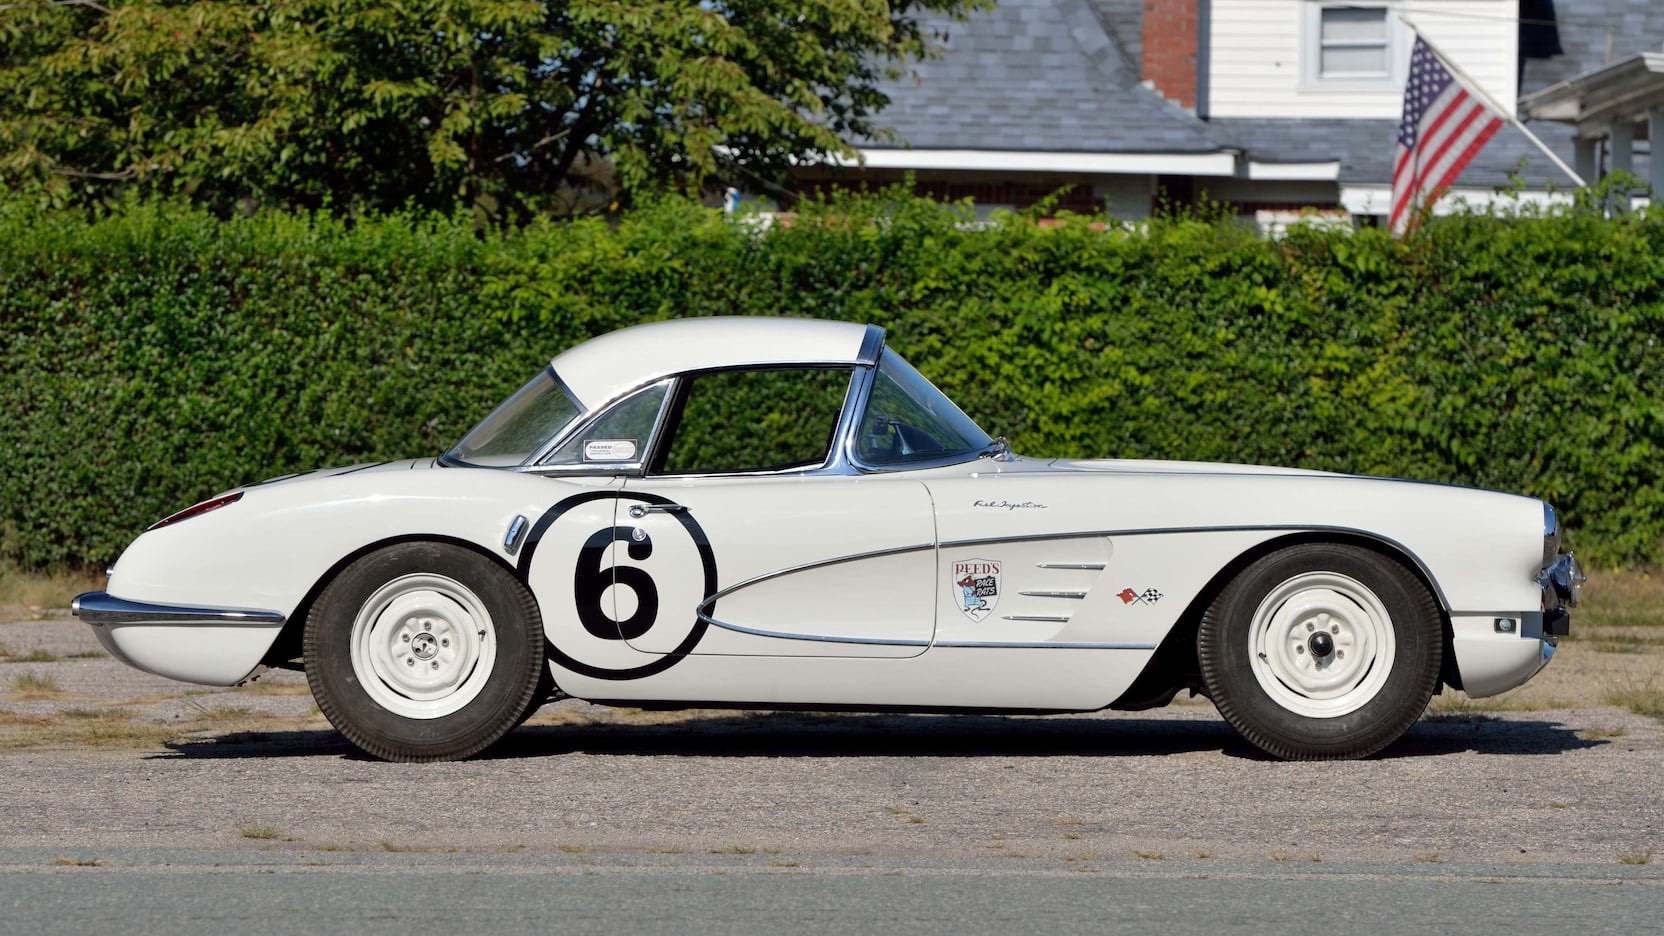 1960 Sebring Corvette driven by Bill Fritts and Chuck Hall